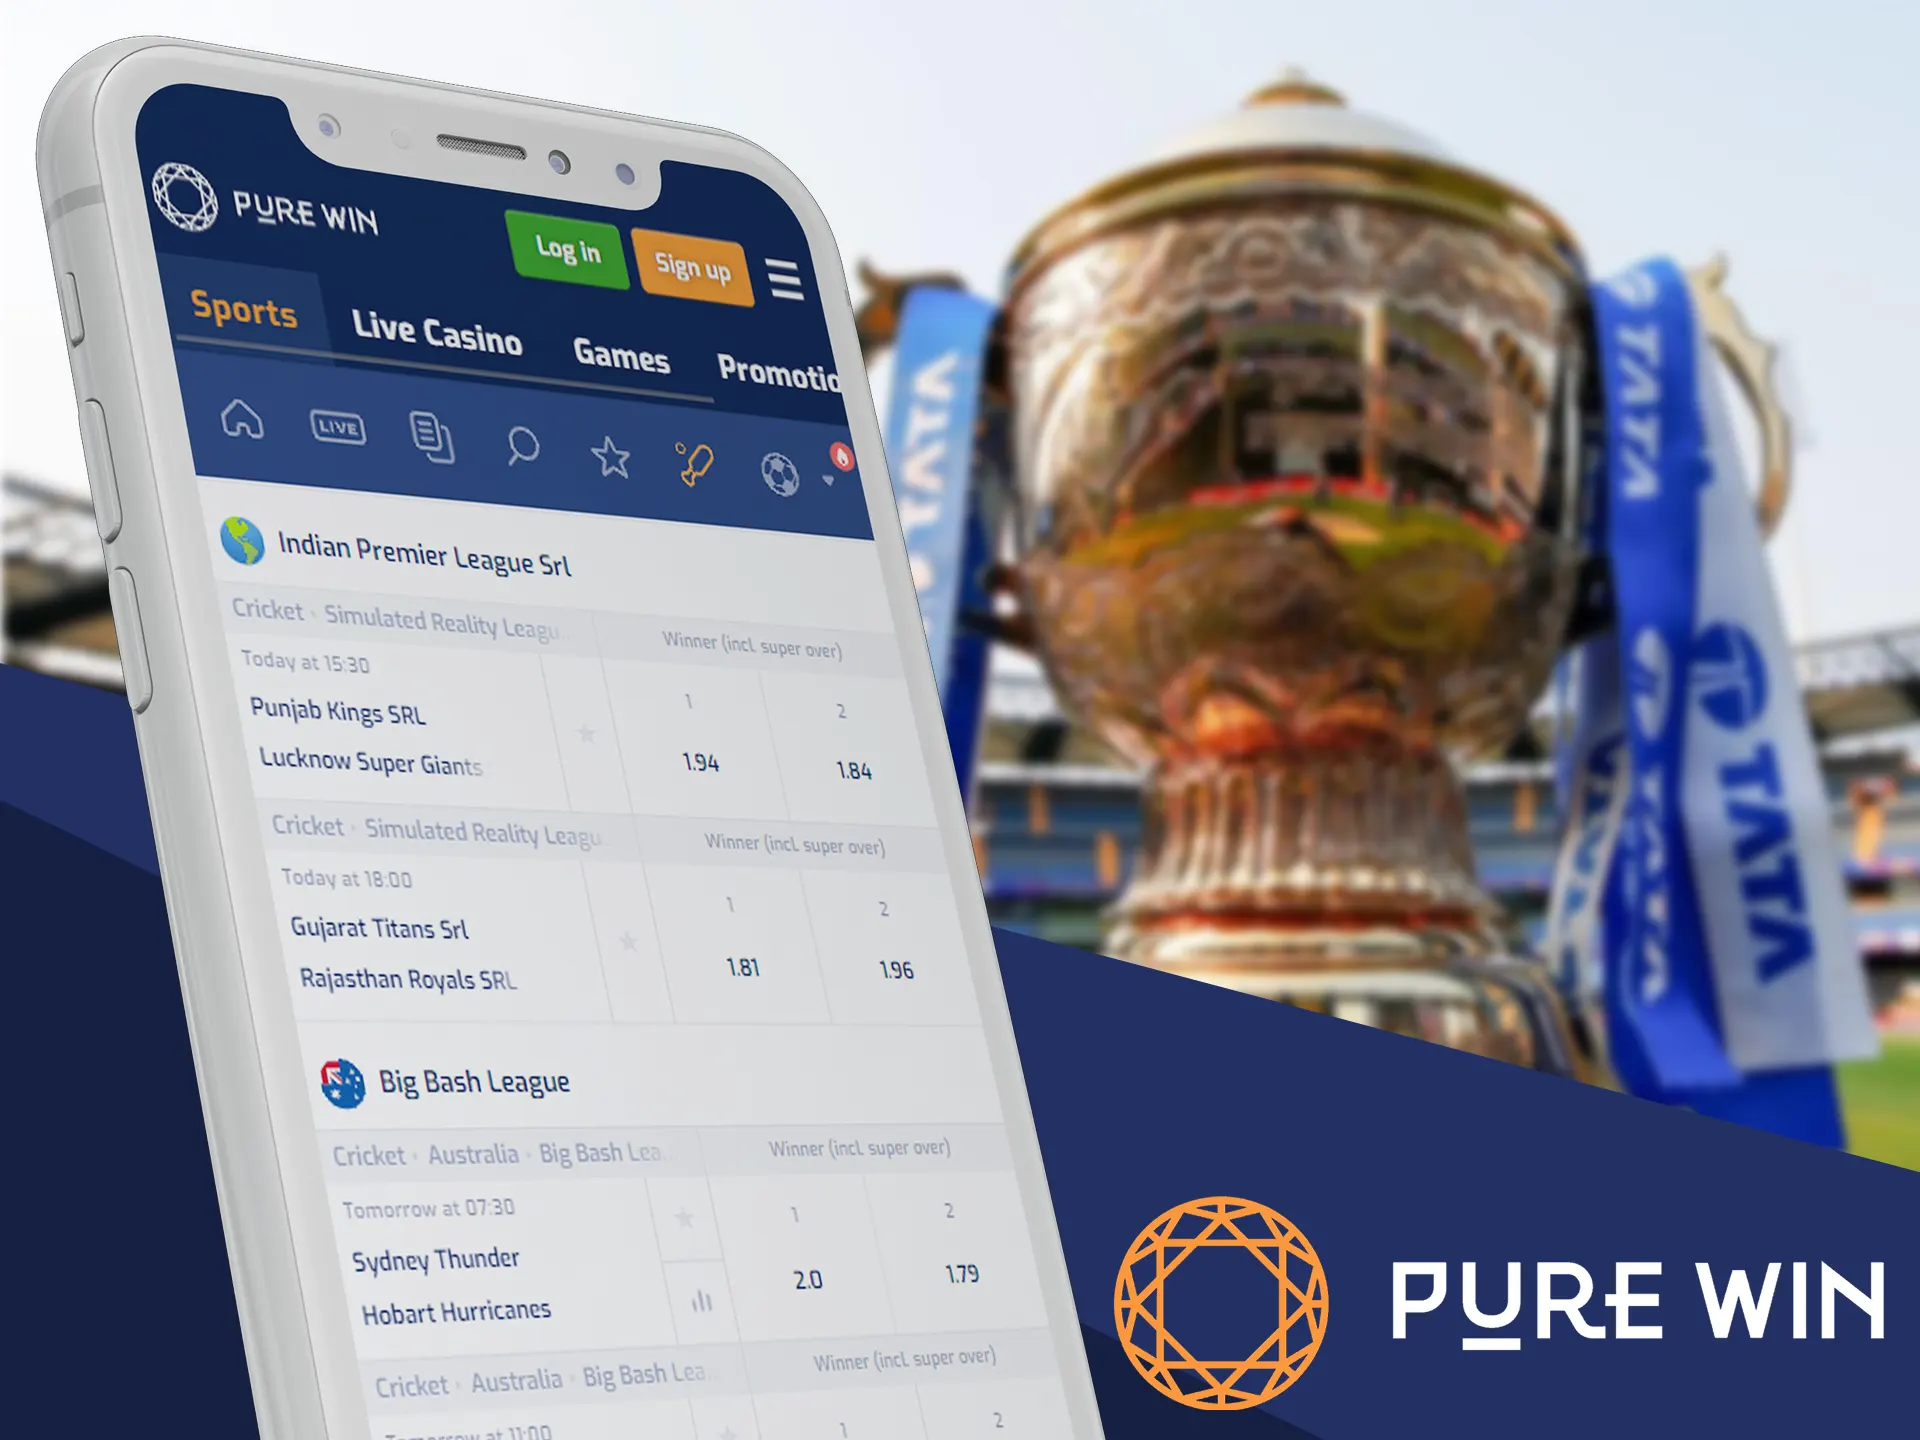 Bet on most intresting matches using Pure Win app.